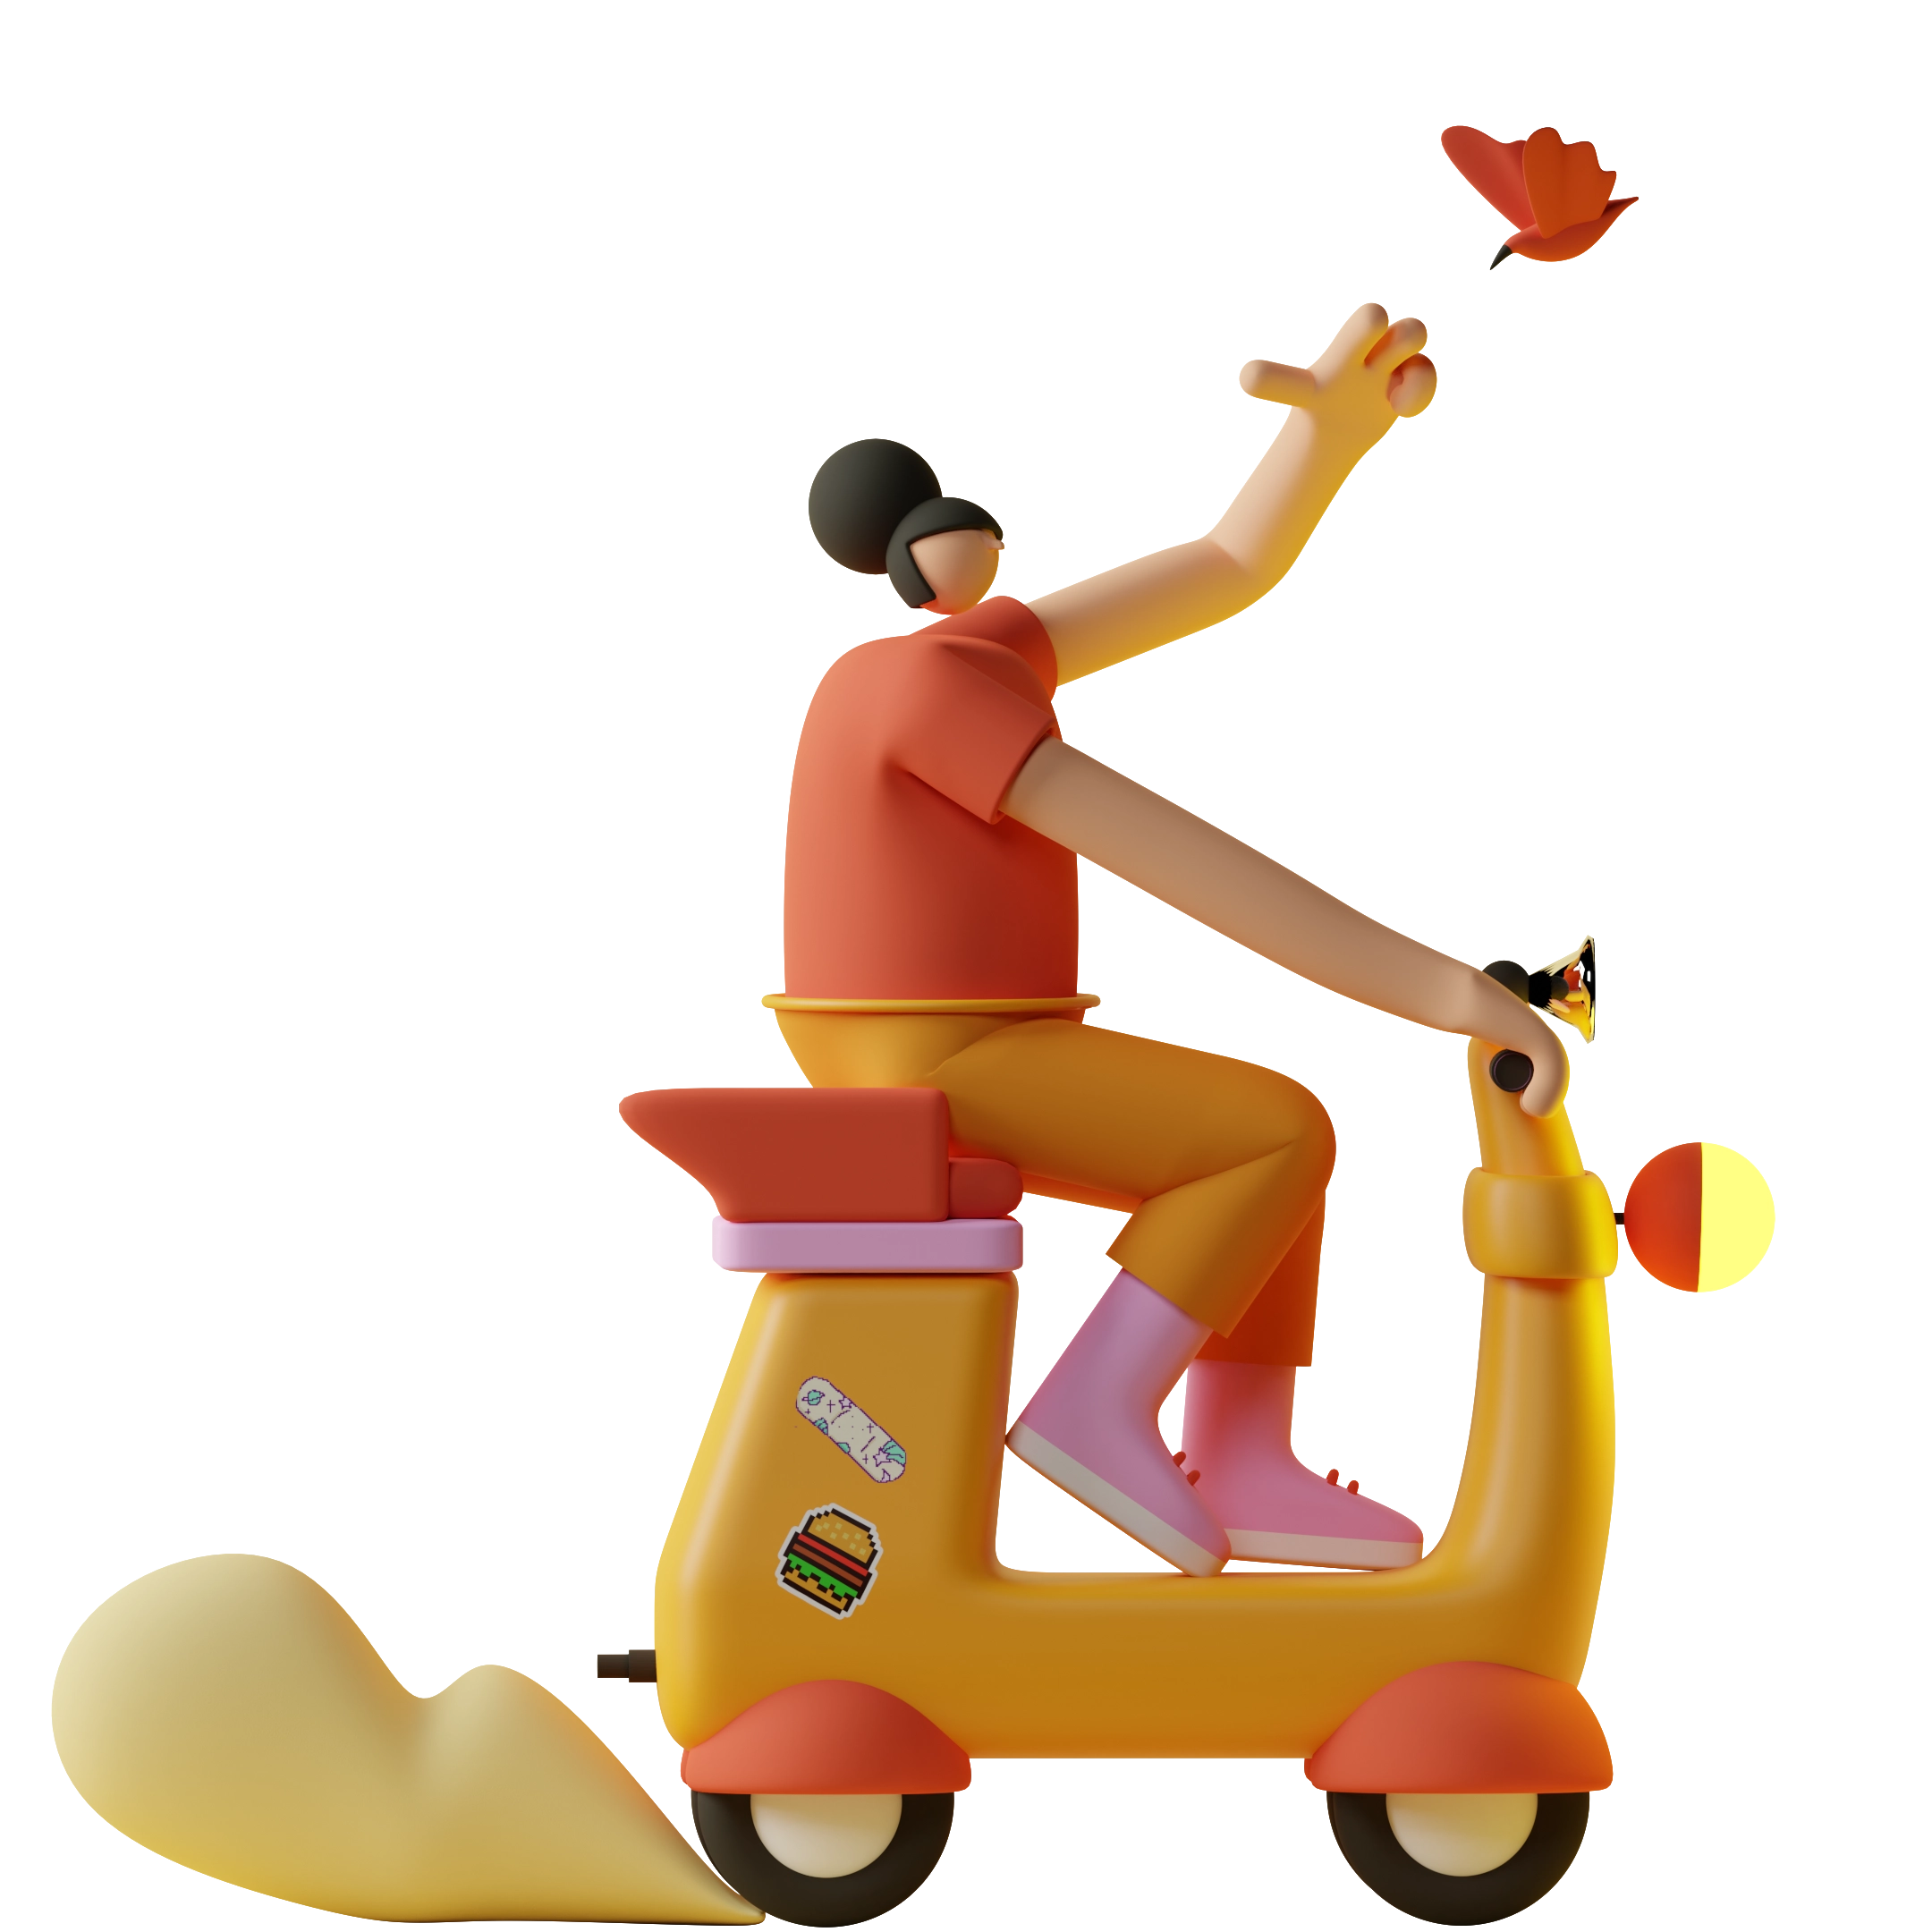 Saly on a scooter - Payroll software